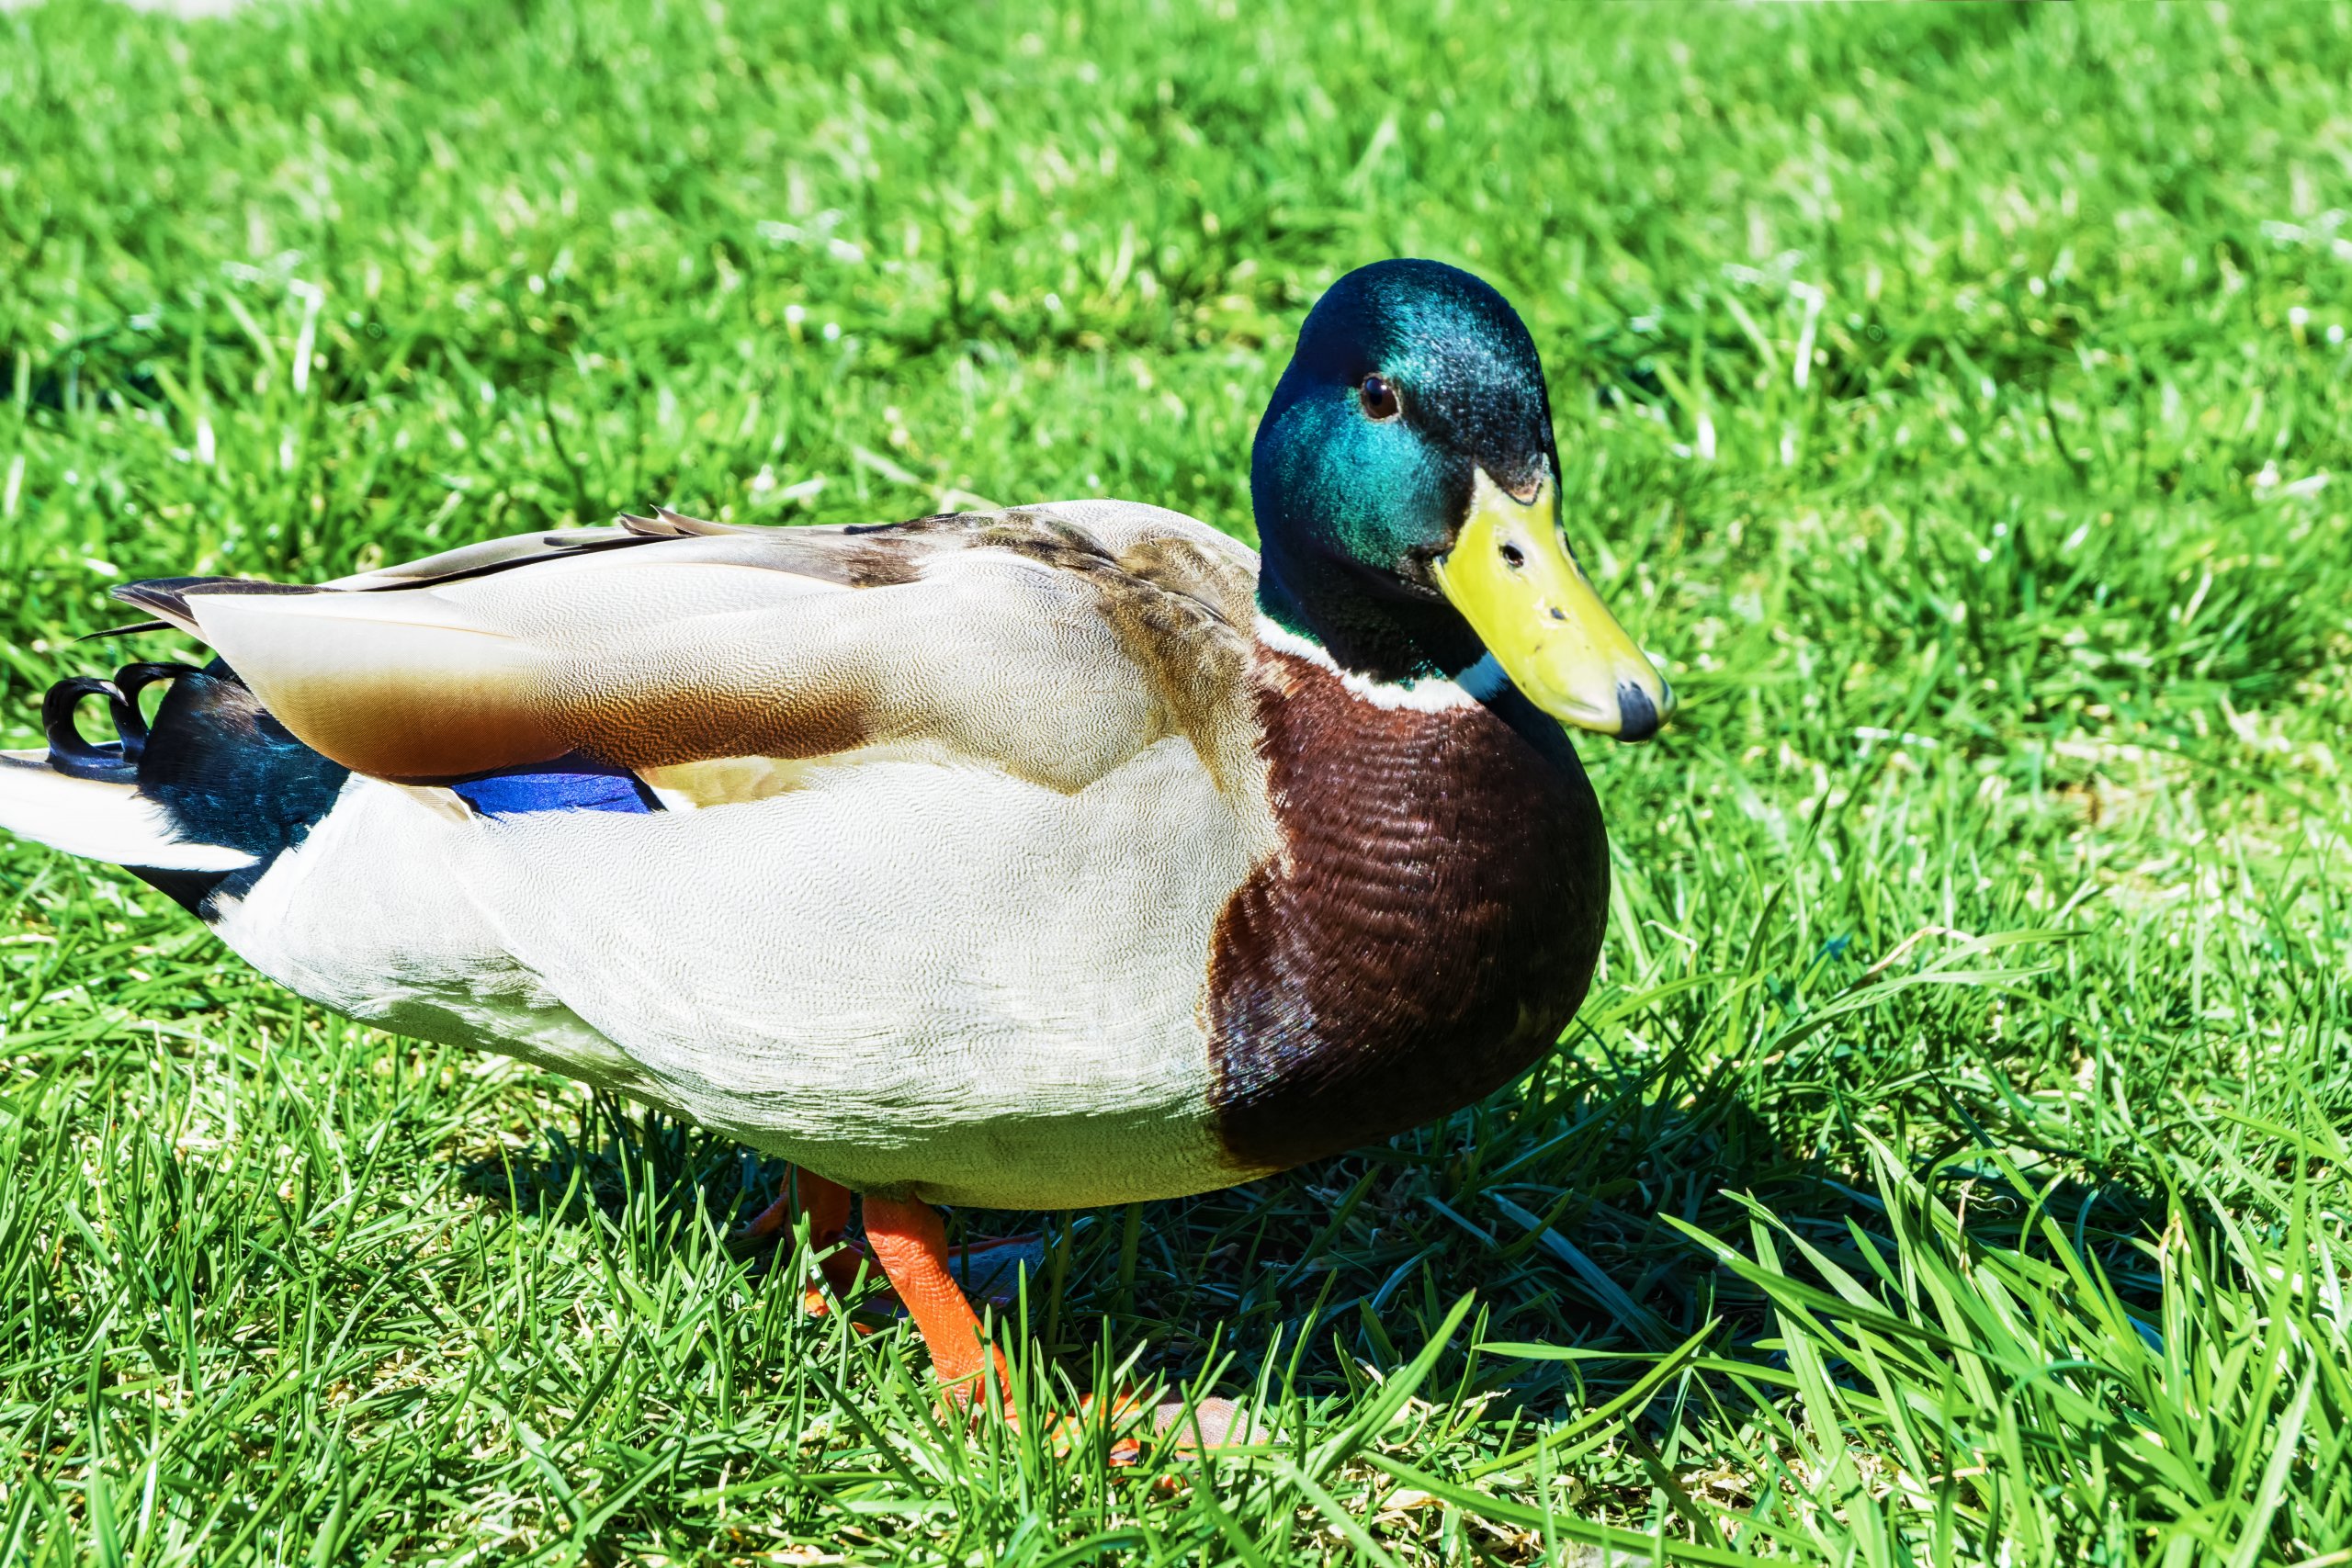 Farmers Can Use Ducks To Kill Pests